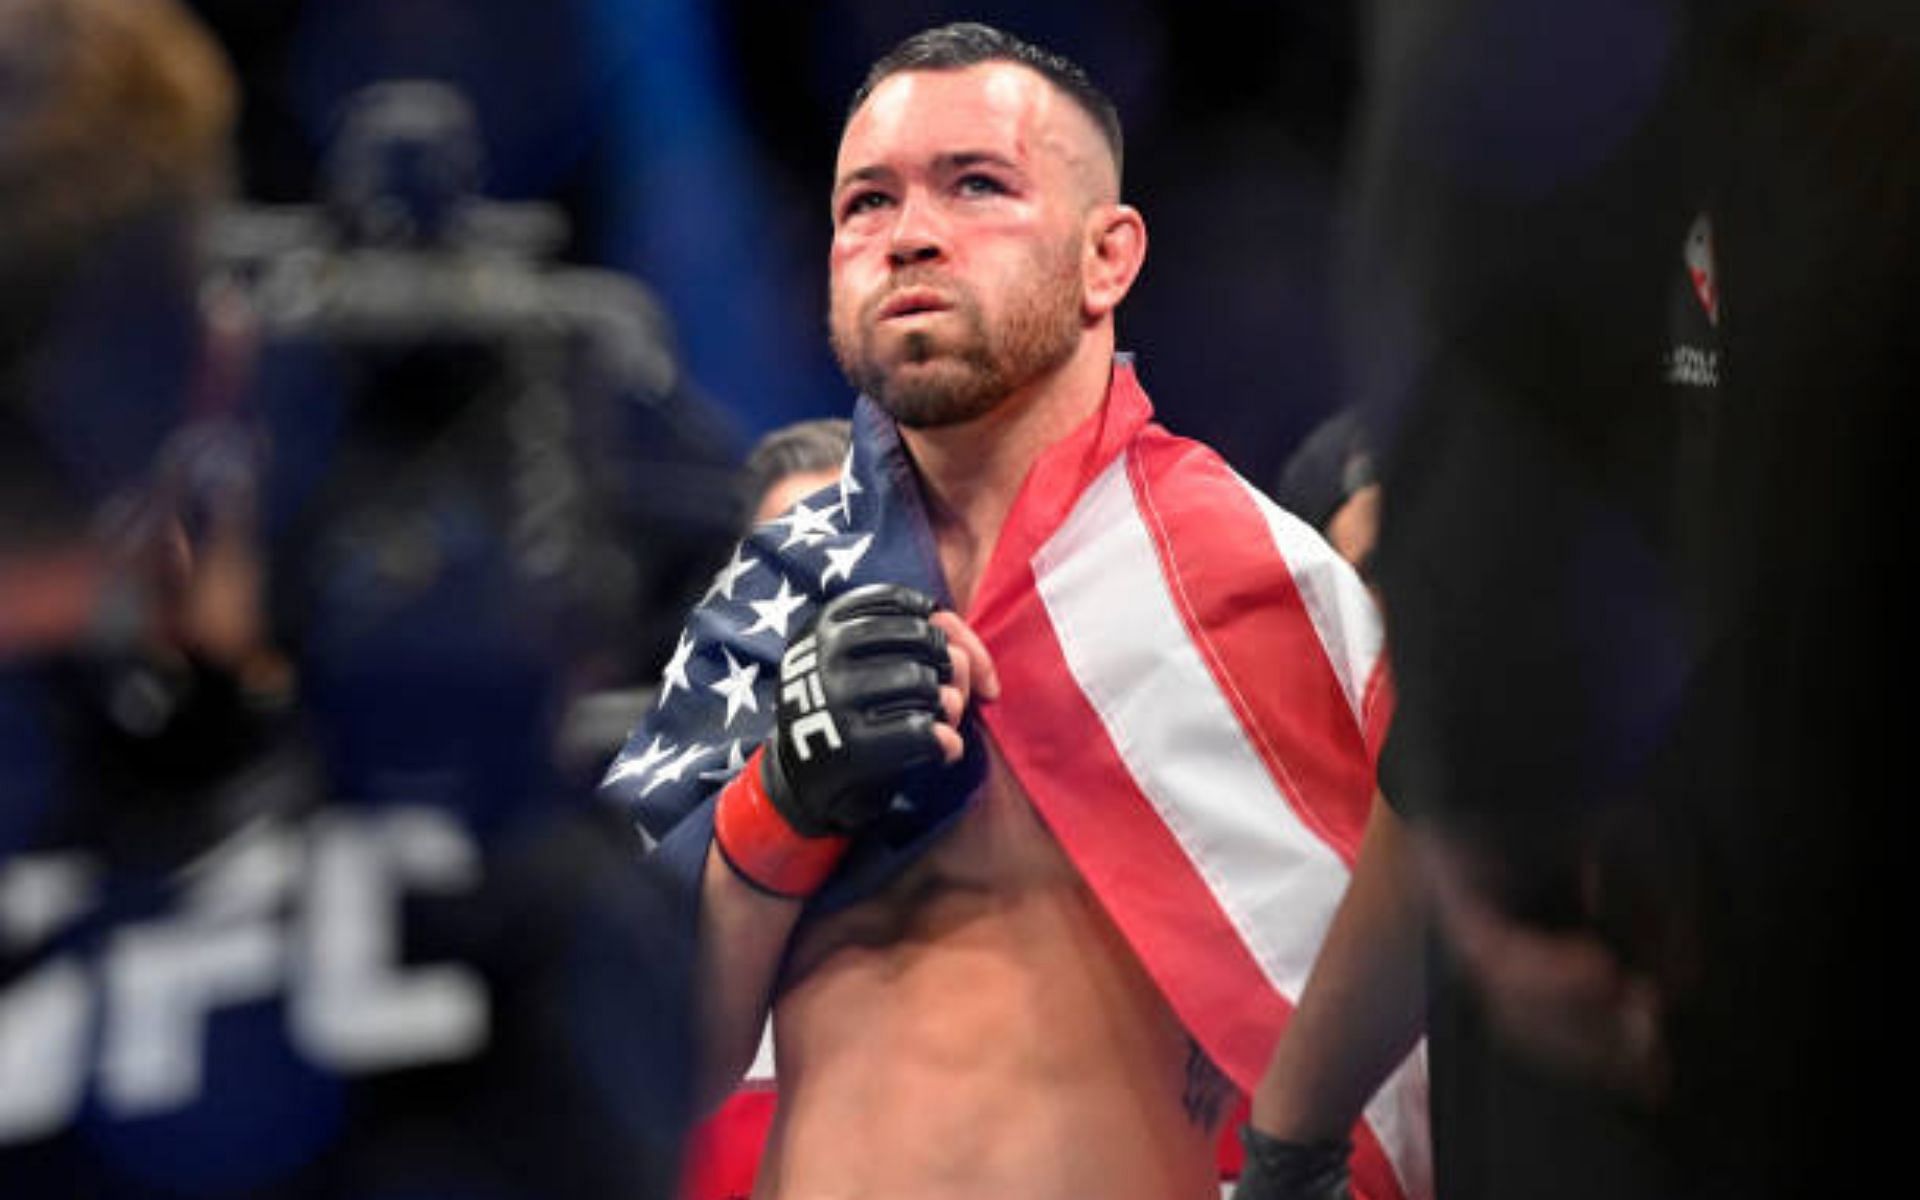 Welterweight contender Colby Covington